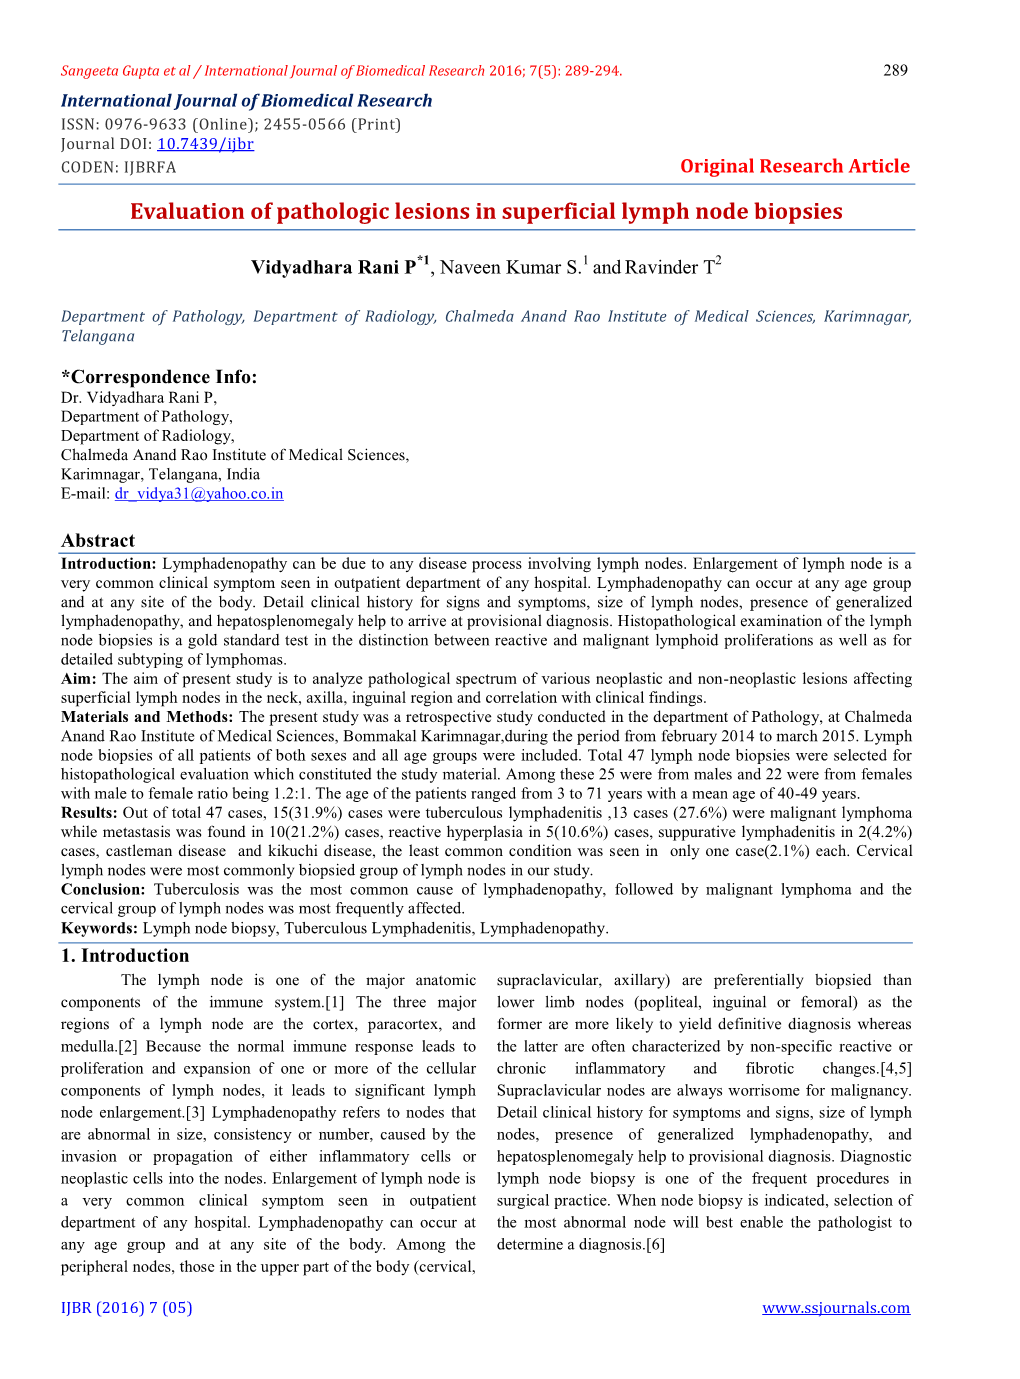 Evaluation of Pathologic Lesions in Superficial Lymph Node Biopsies